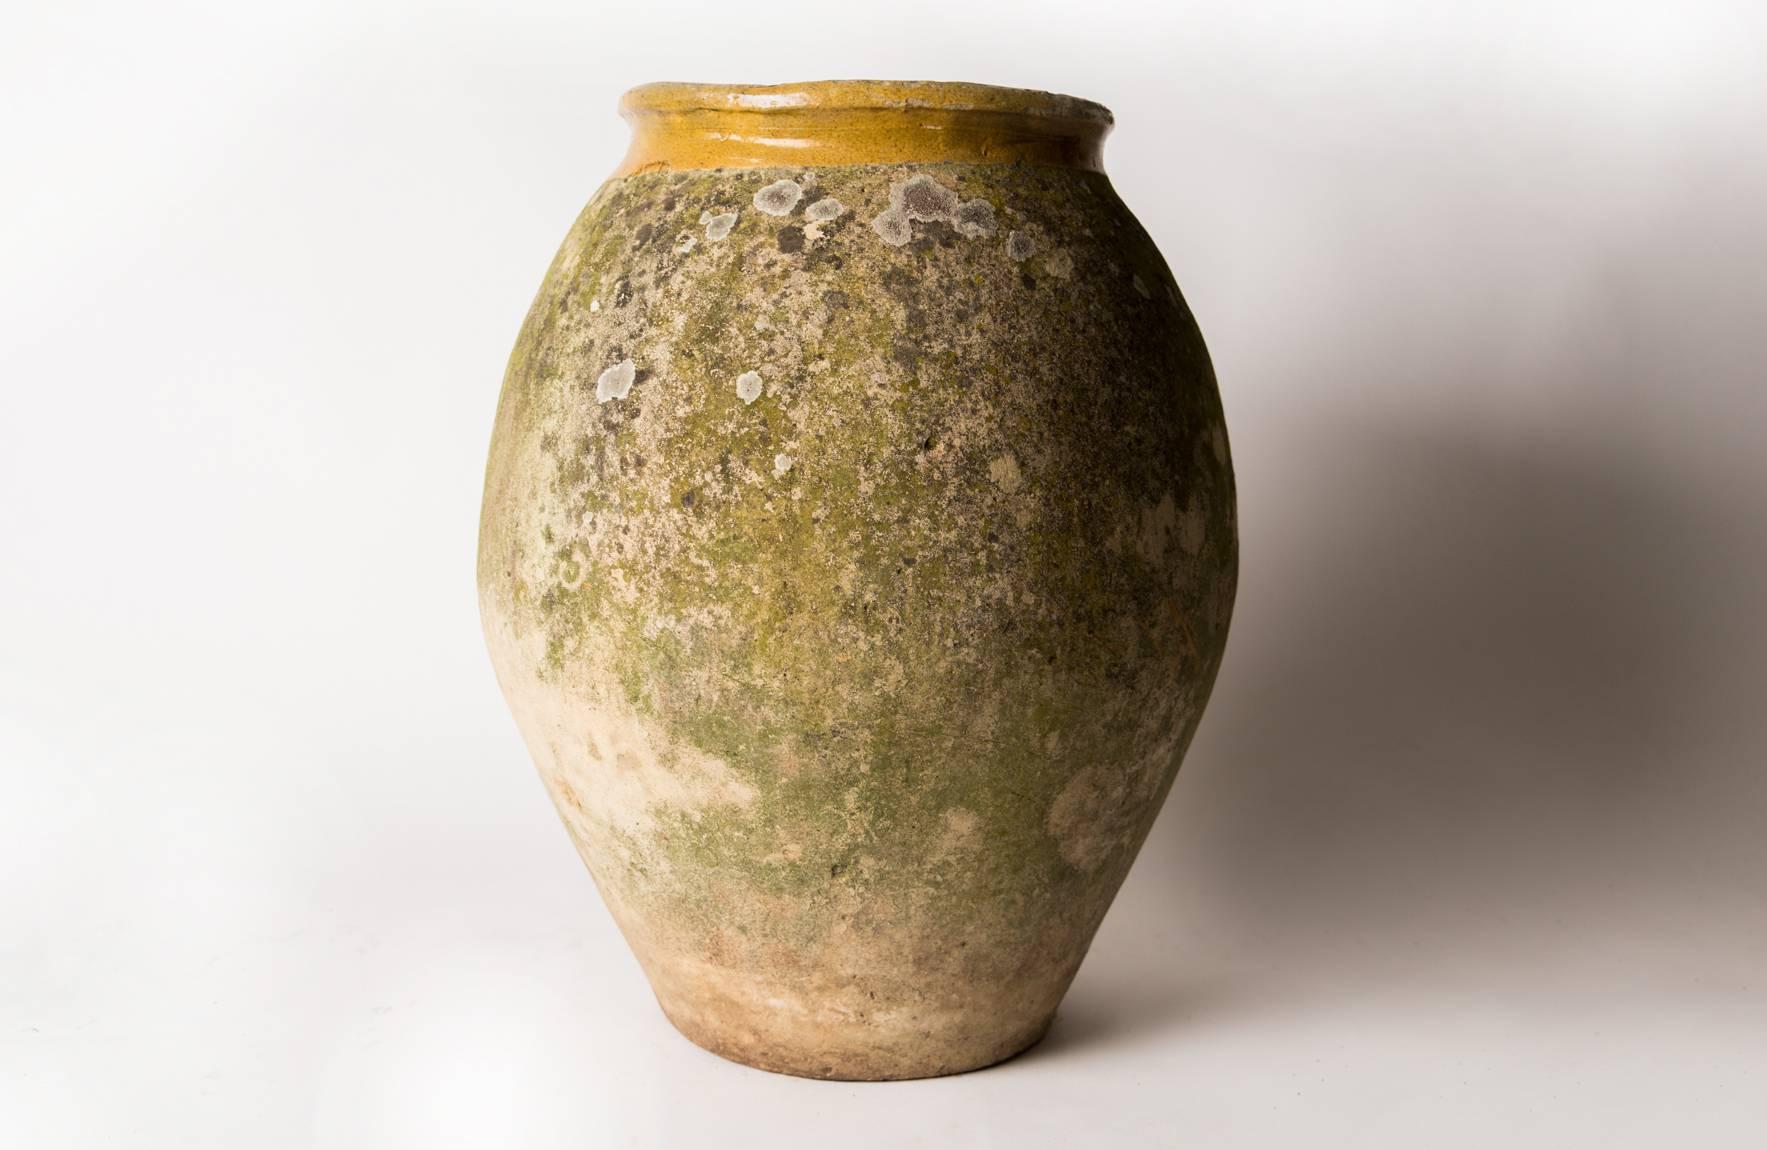 Biot Terracotta Oil Jar with Ochre Glaze and Patination, Late 18th Century 1